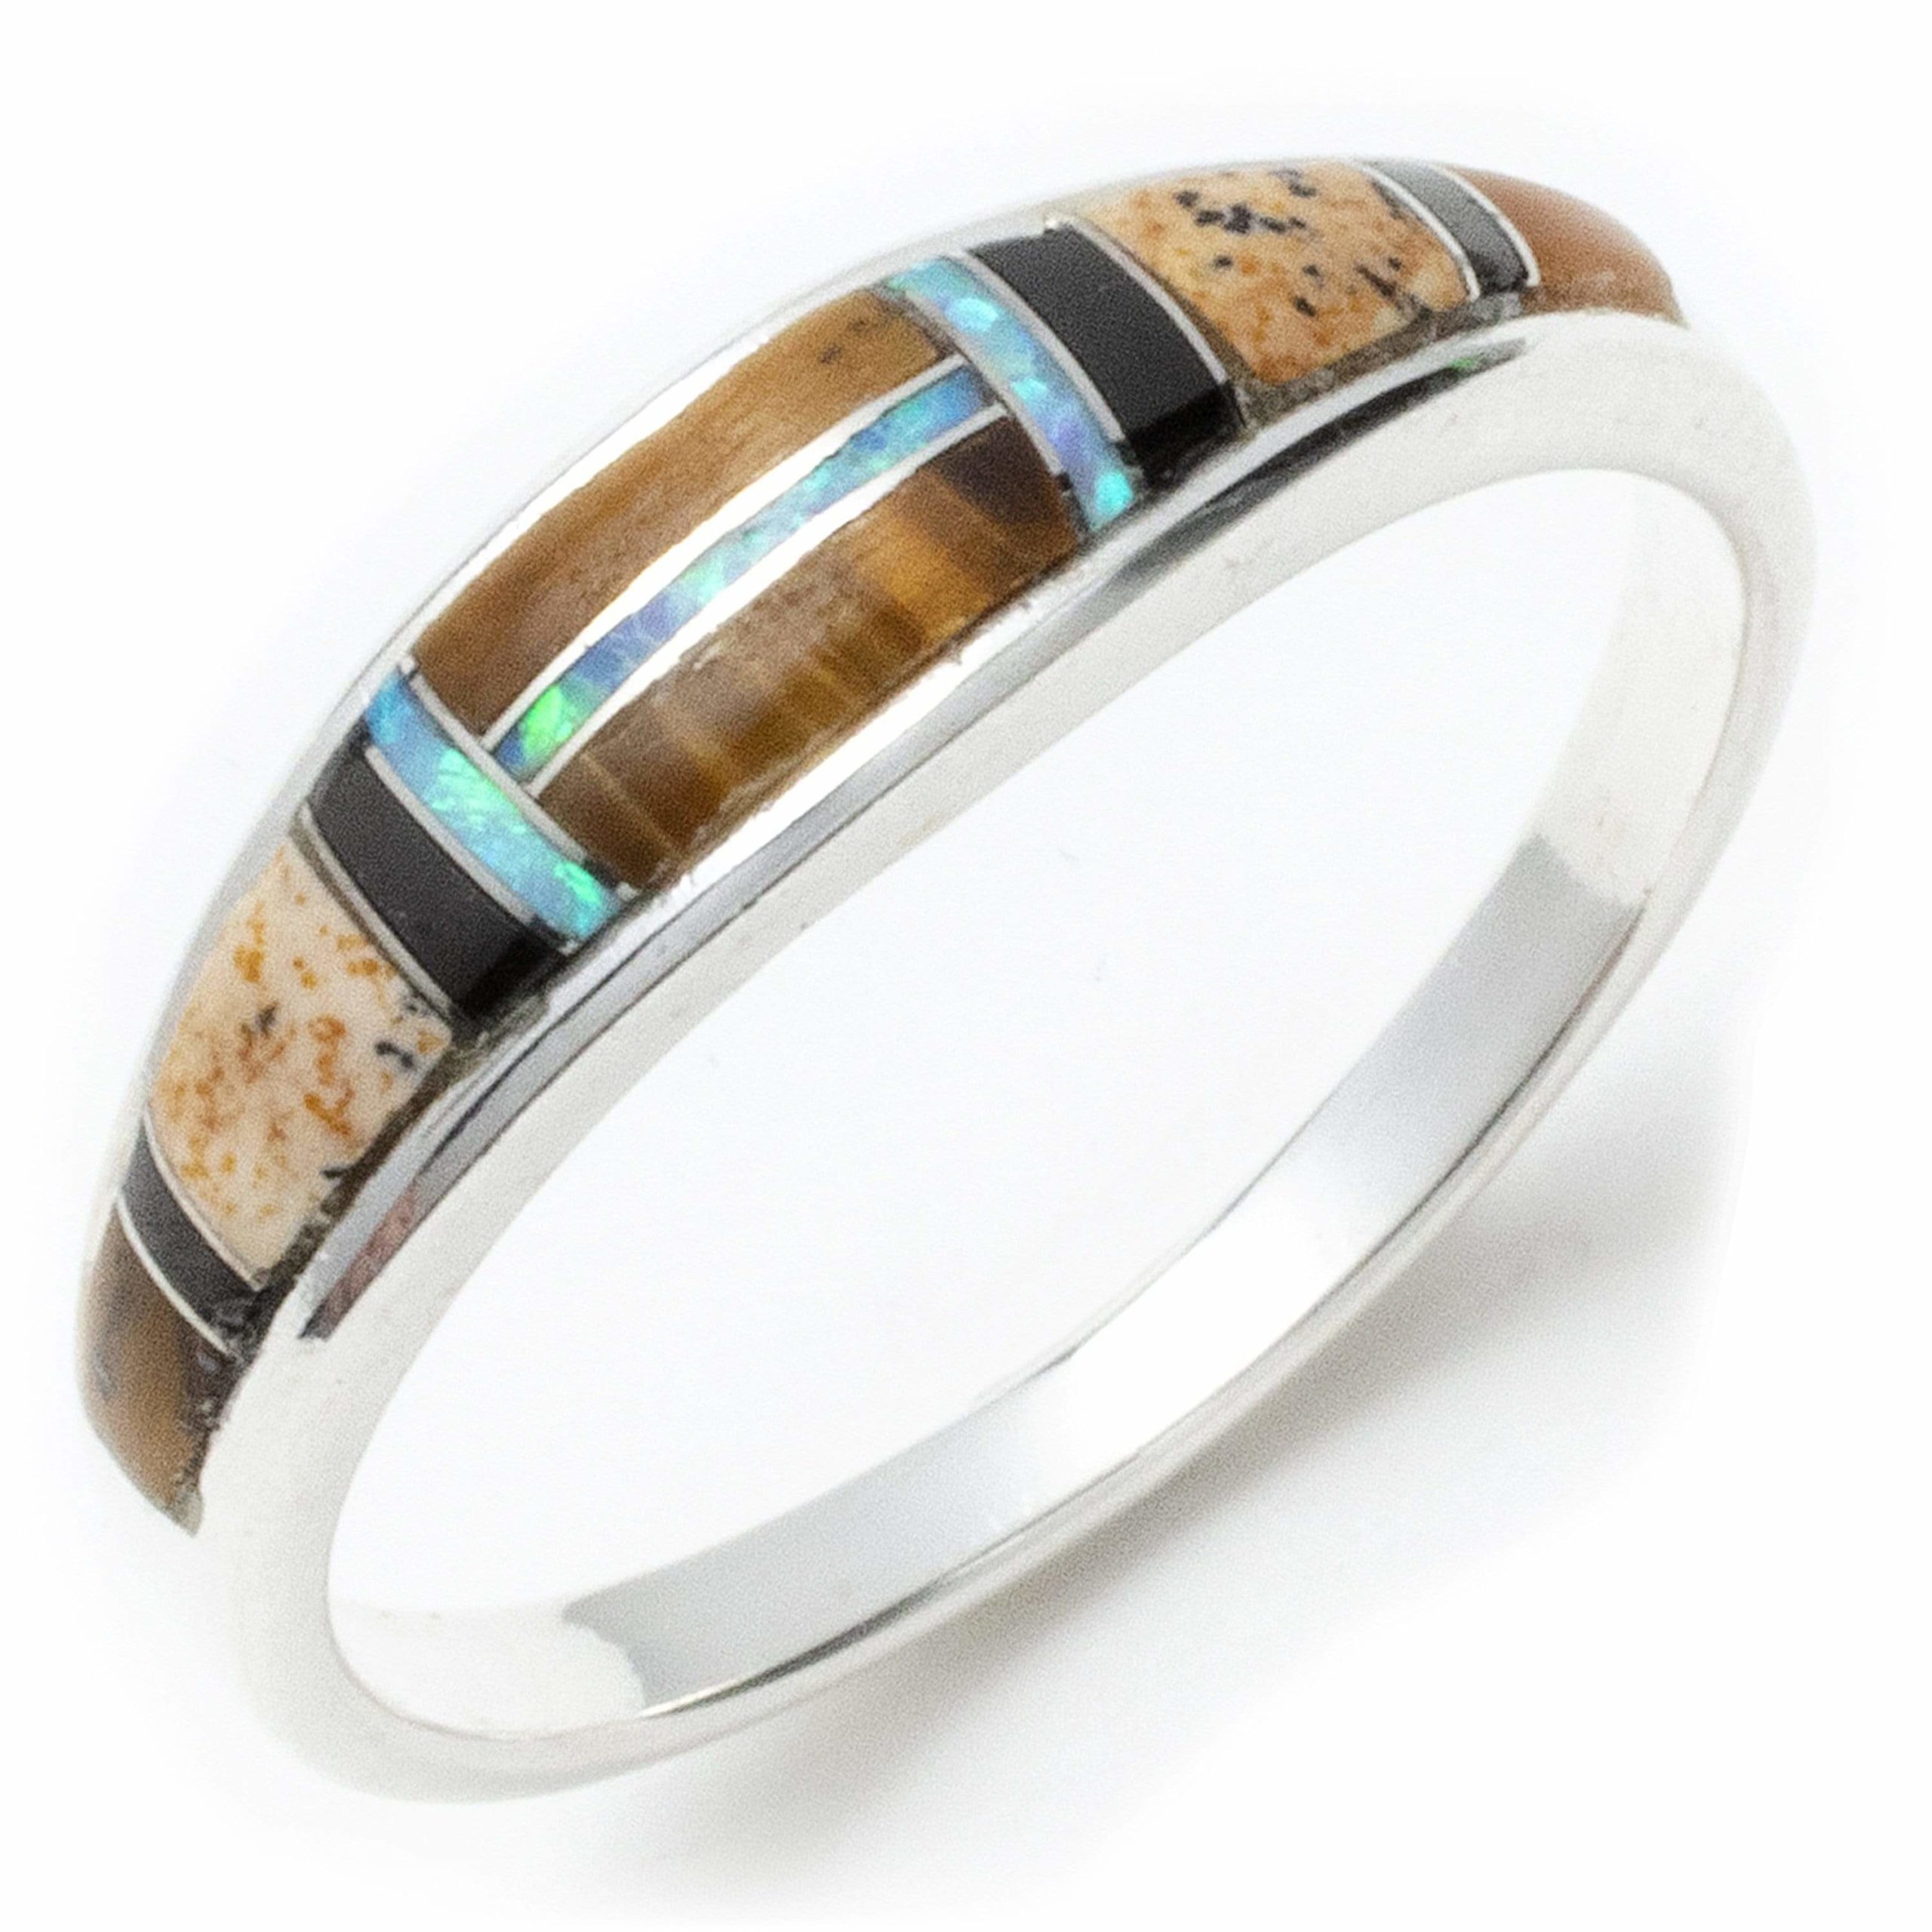 kalifano native american jewelry nmr 0708 te tiger eye 925 sterling silver ring usa handmade with lab opal accent 11535283126332 scaled